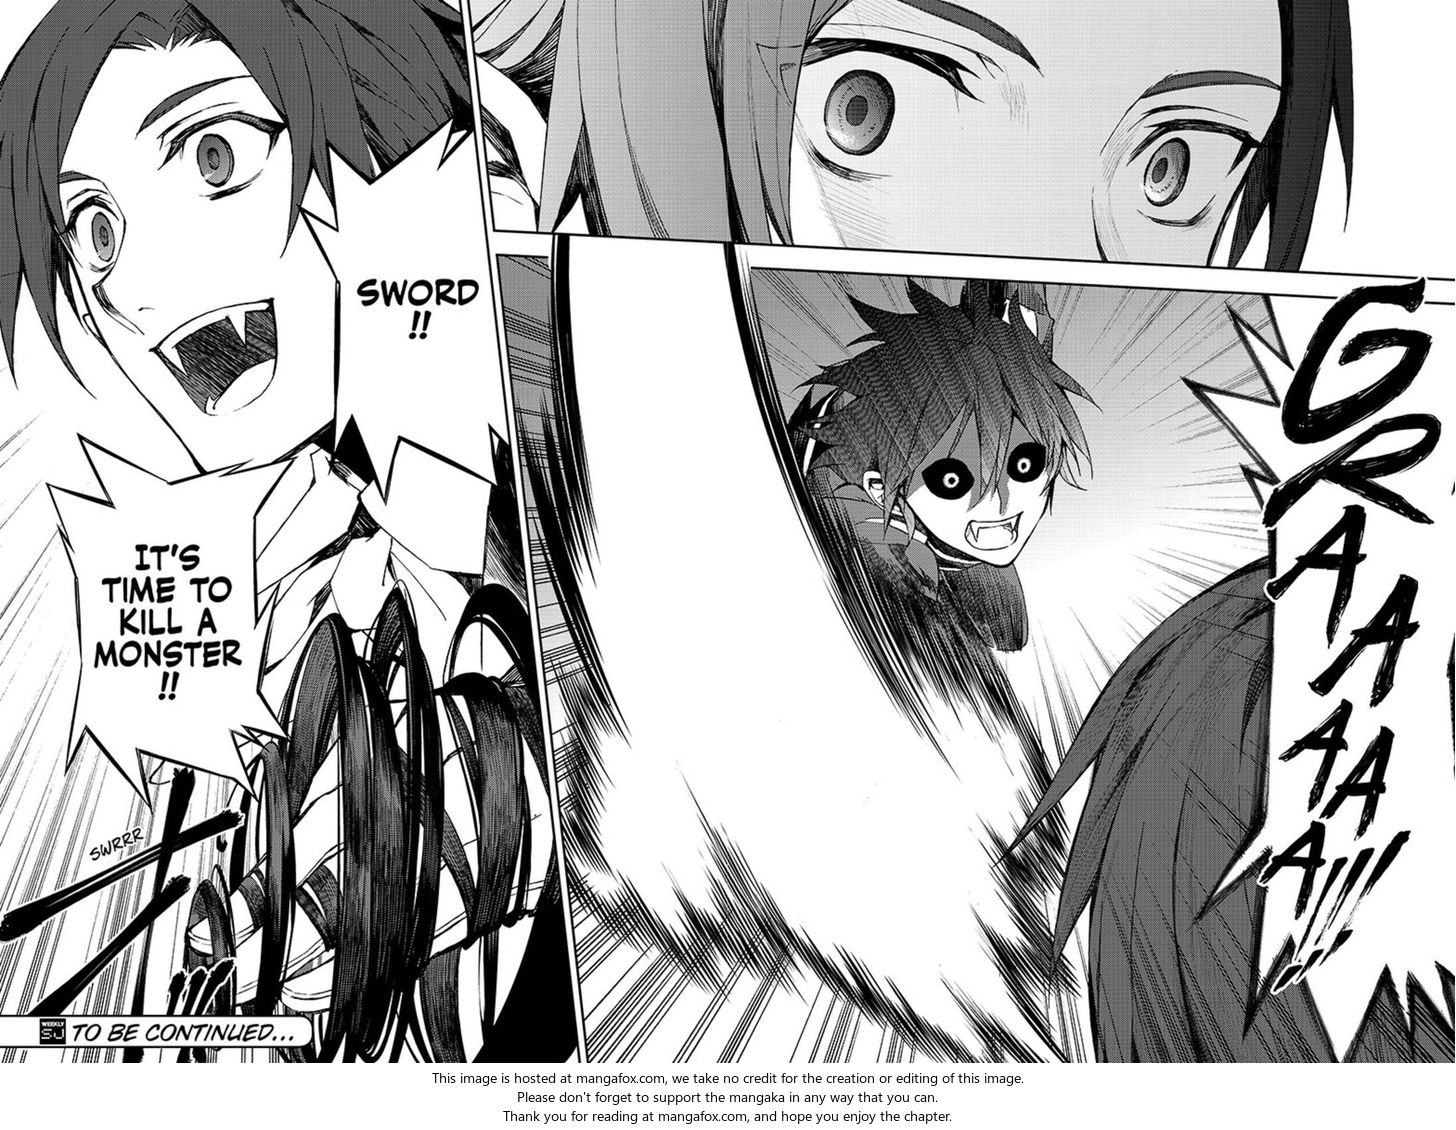 Seraph of the End Manga, Chapter 60